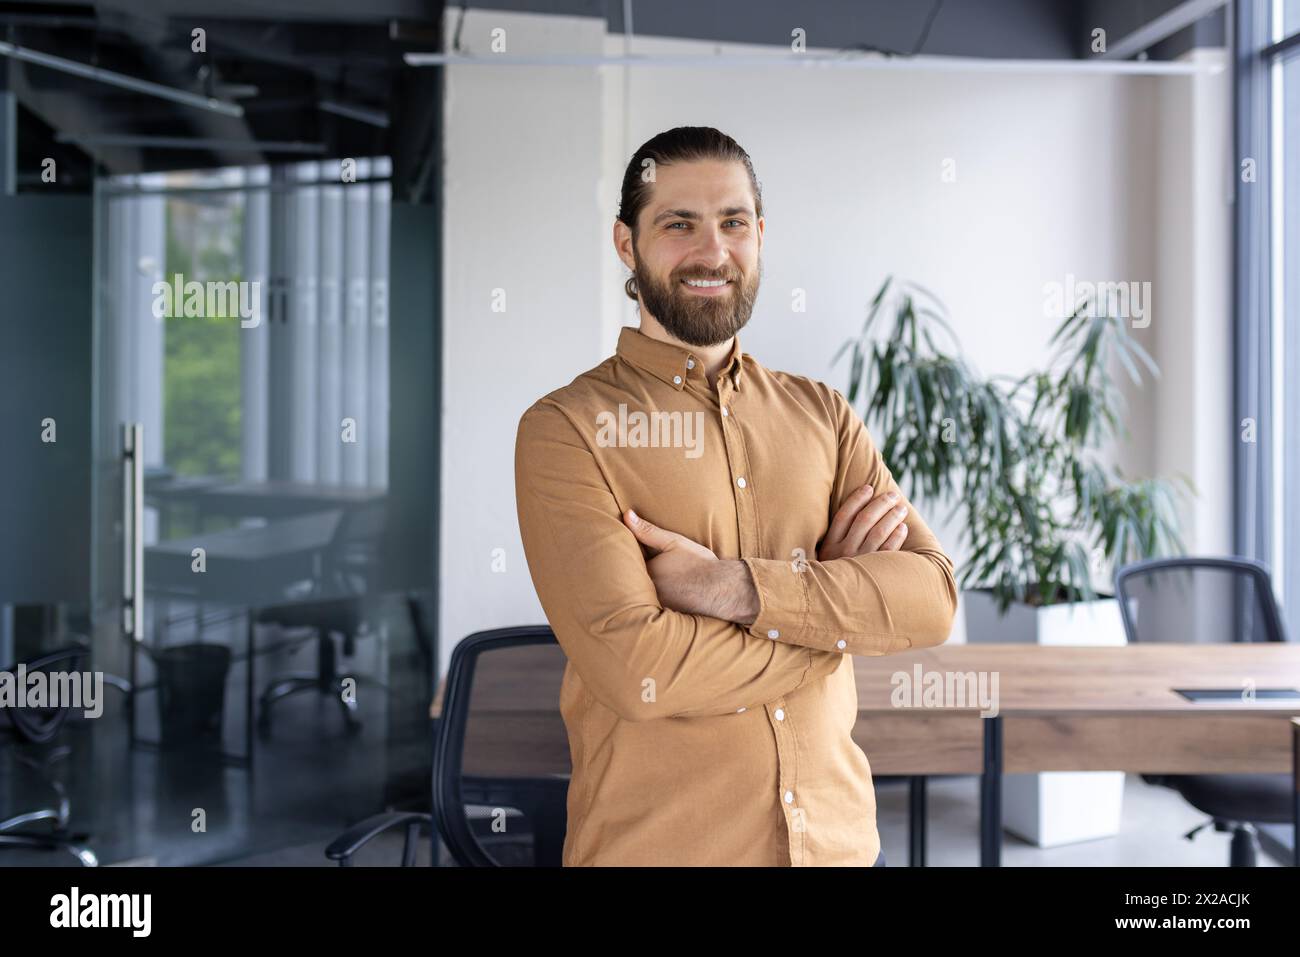 A cheerful, bearded businessman standing confidently with arms crossed in a contemporary office environment, exuding professionalism and positivity. Stock Photo